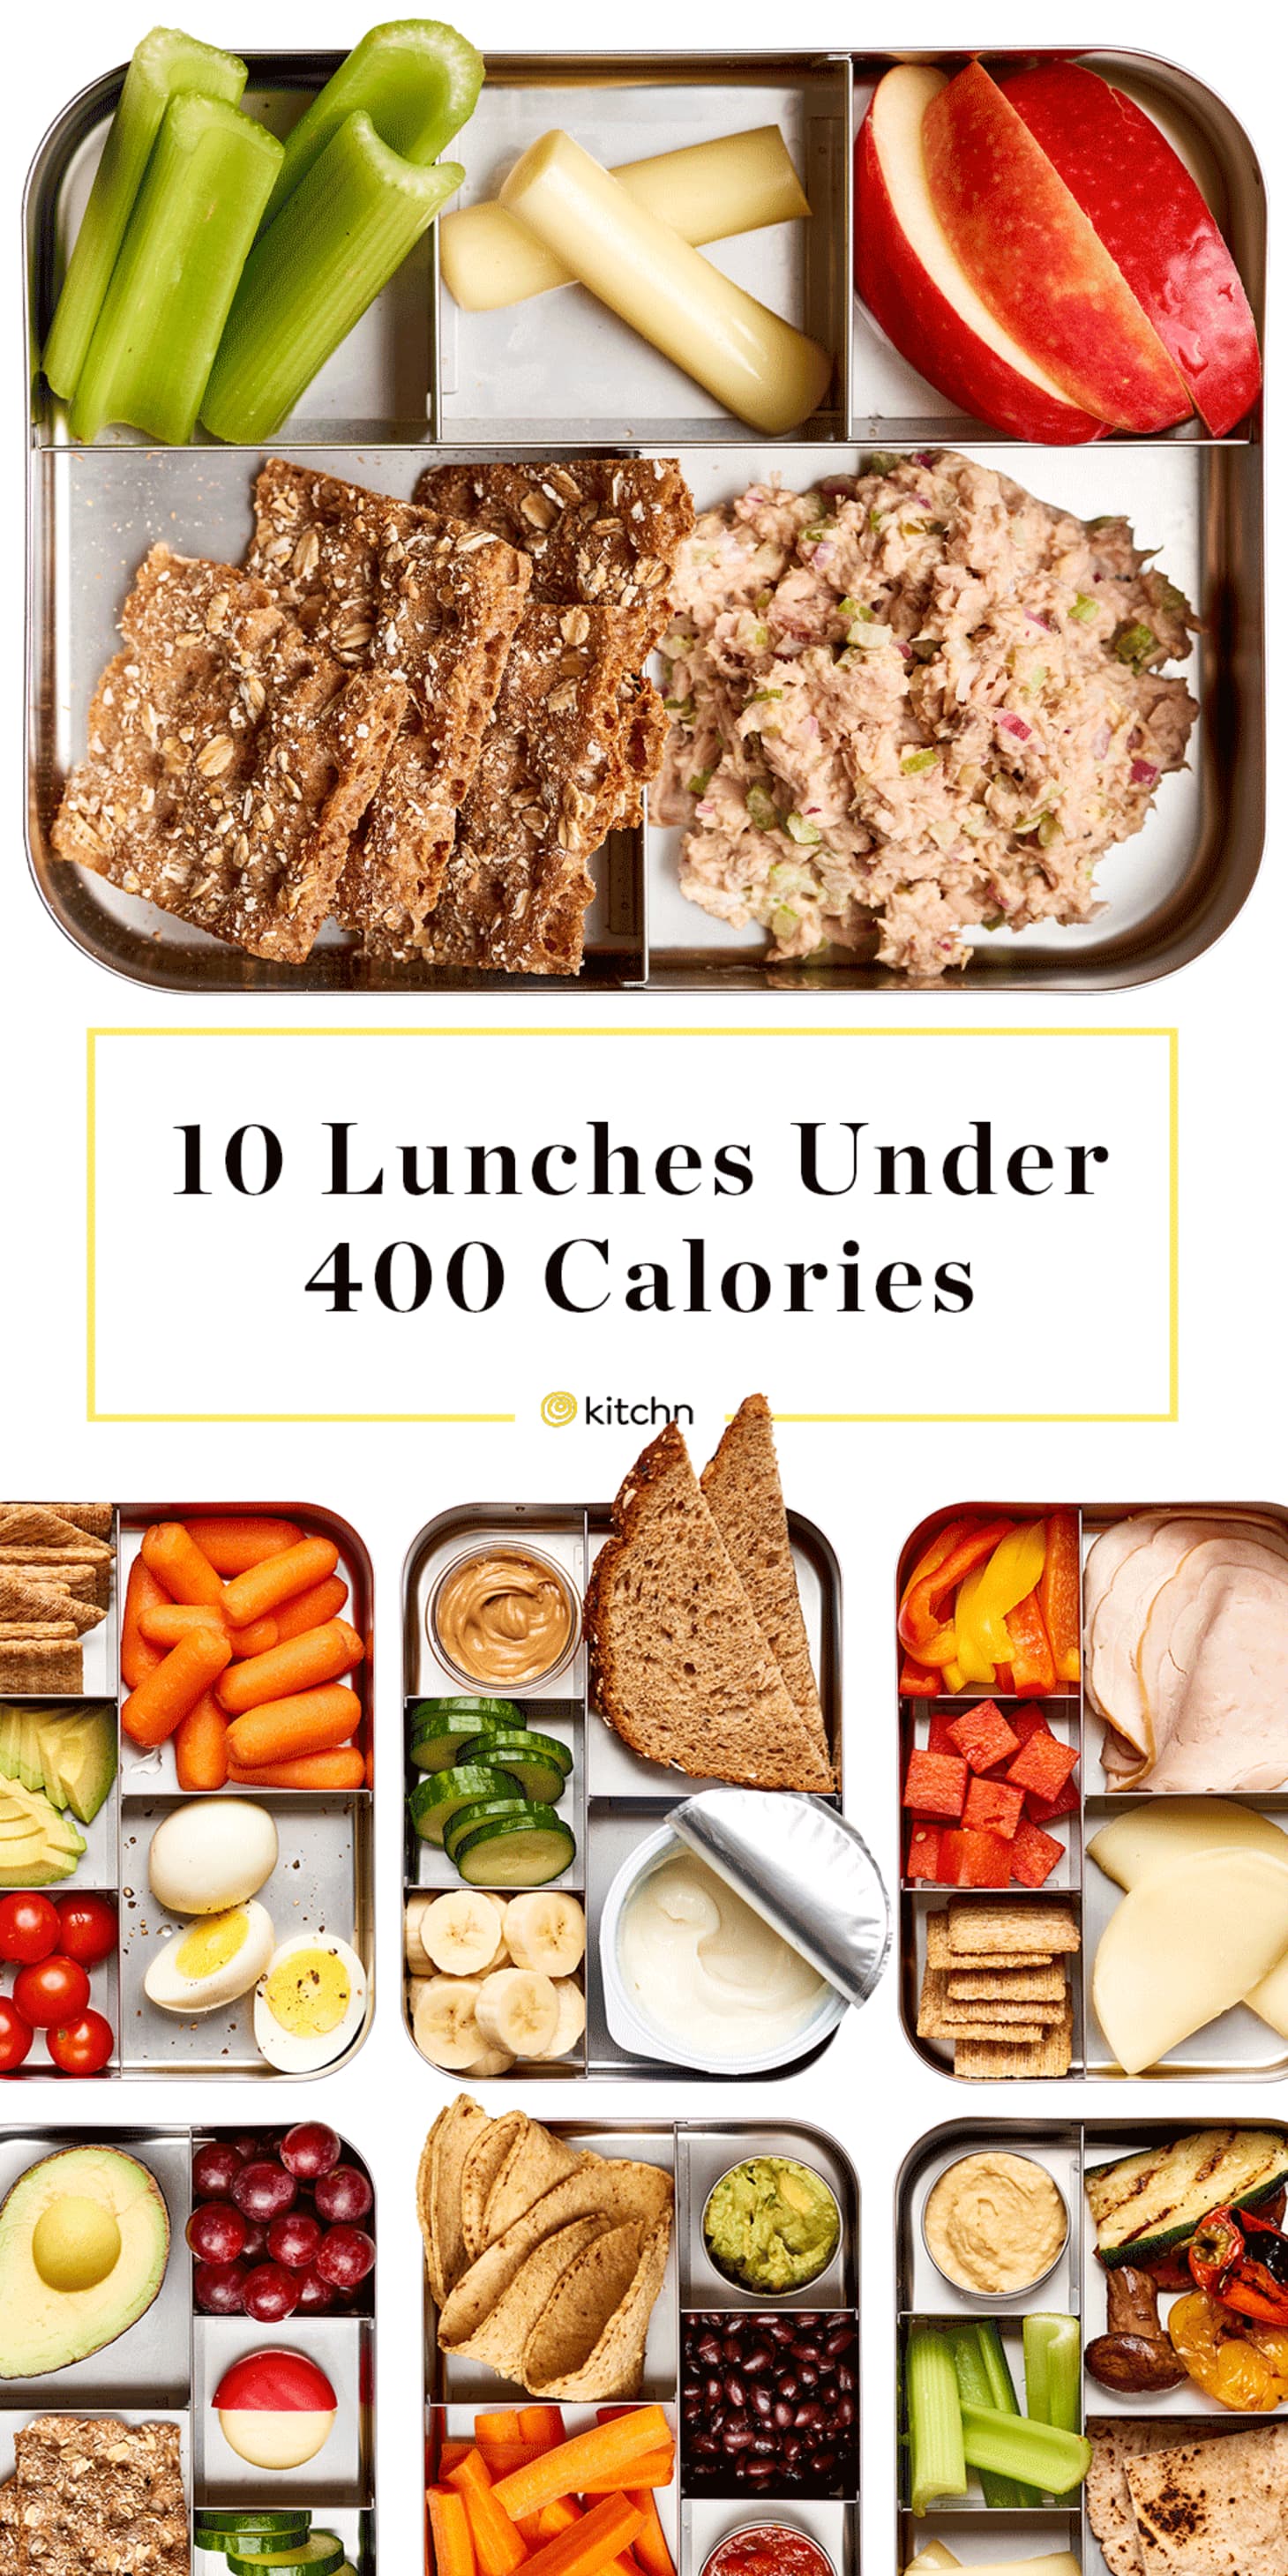 10-easy-lunch-ideas-under-400-calories-kitchn